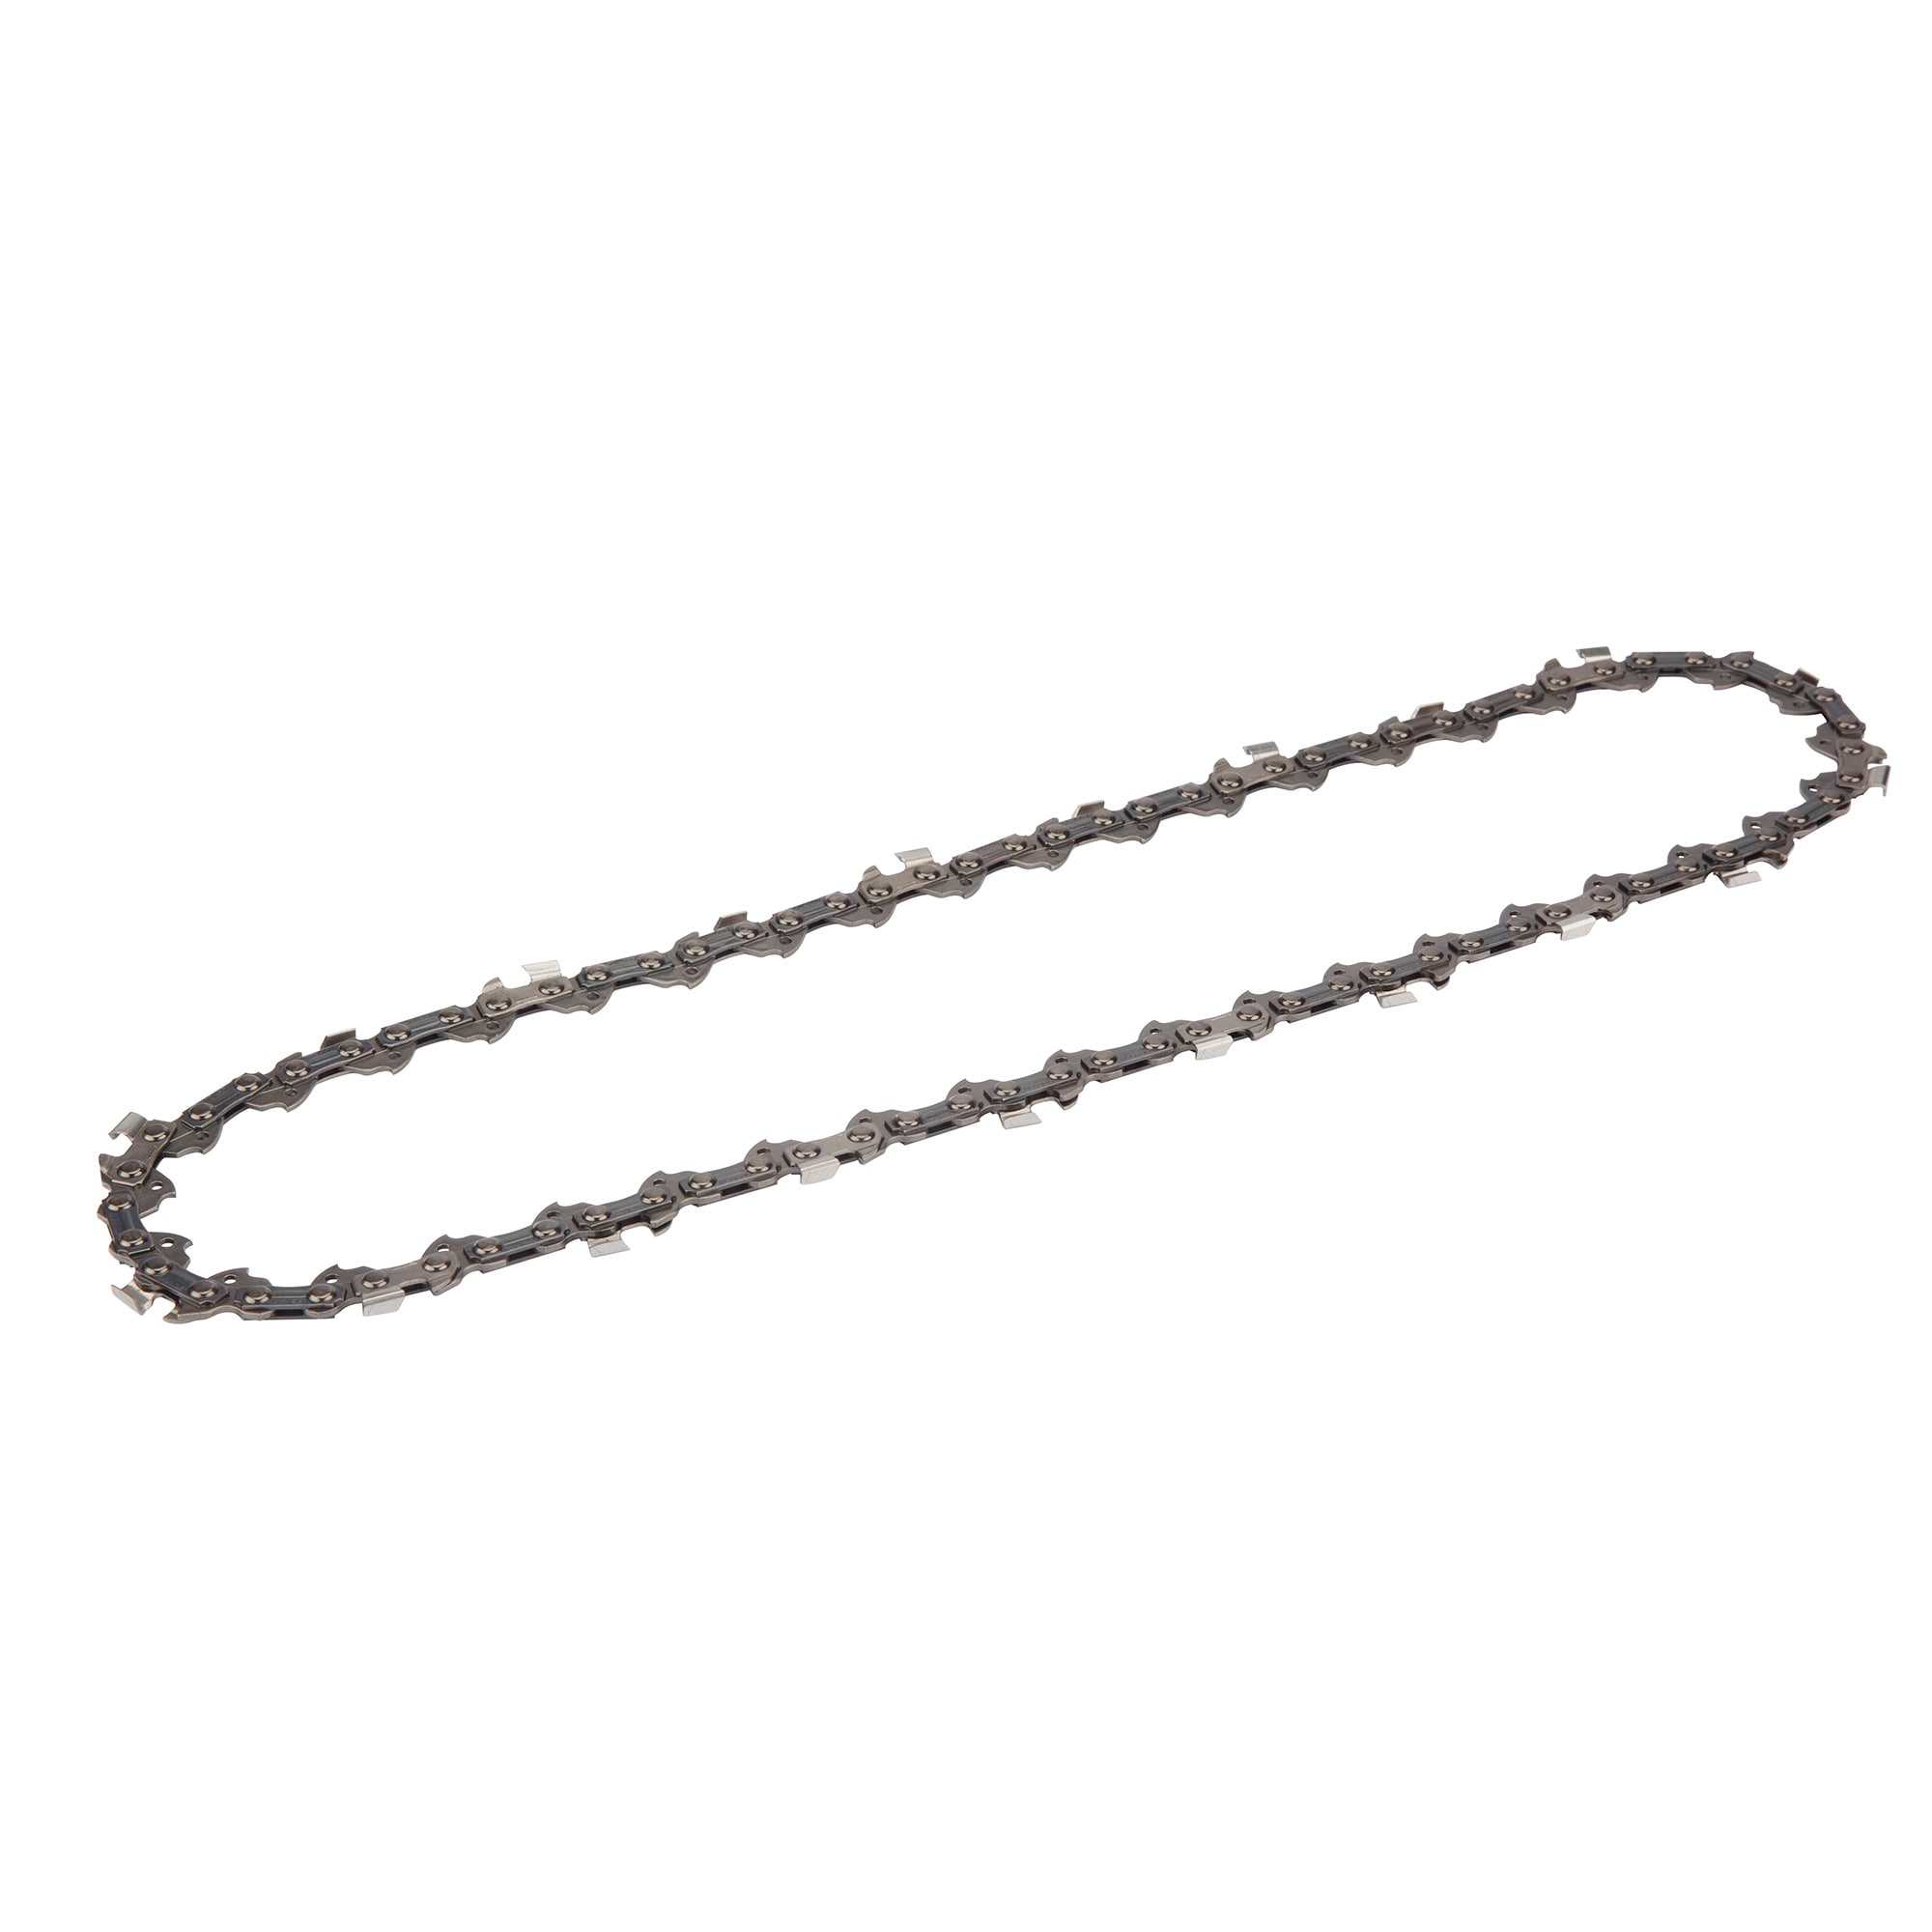 Makita 10 inch Pole Chain Saw Chainsaw Guide Bar Tool Replacement Accessory Part 